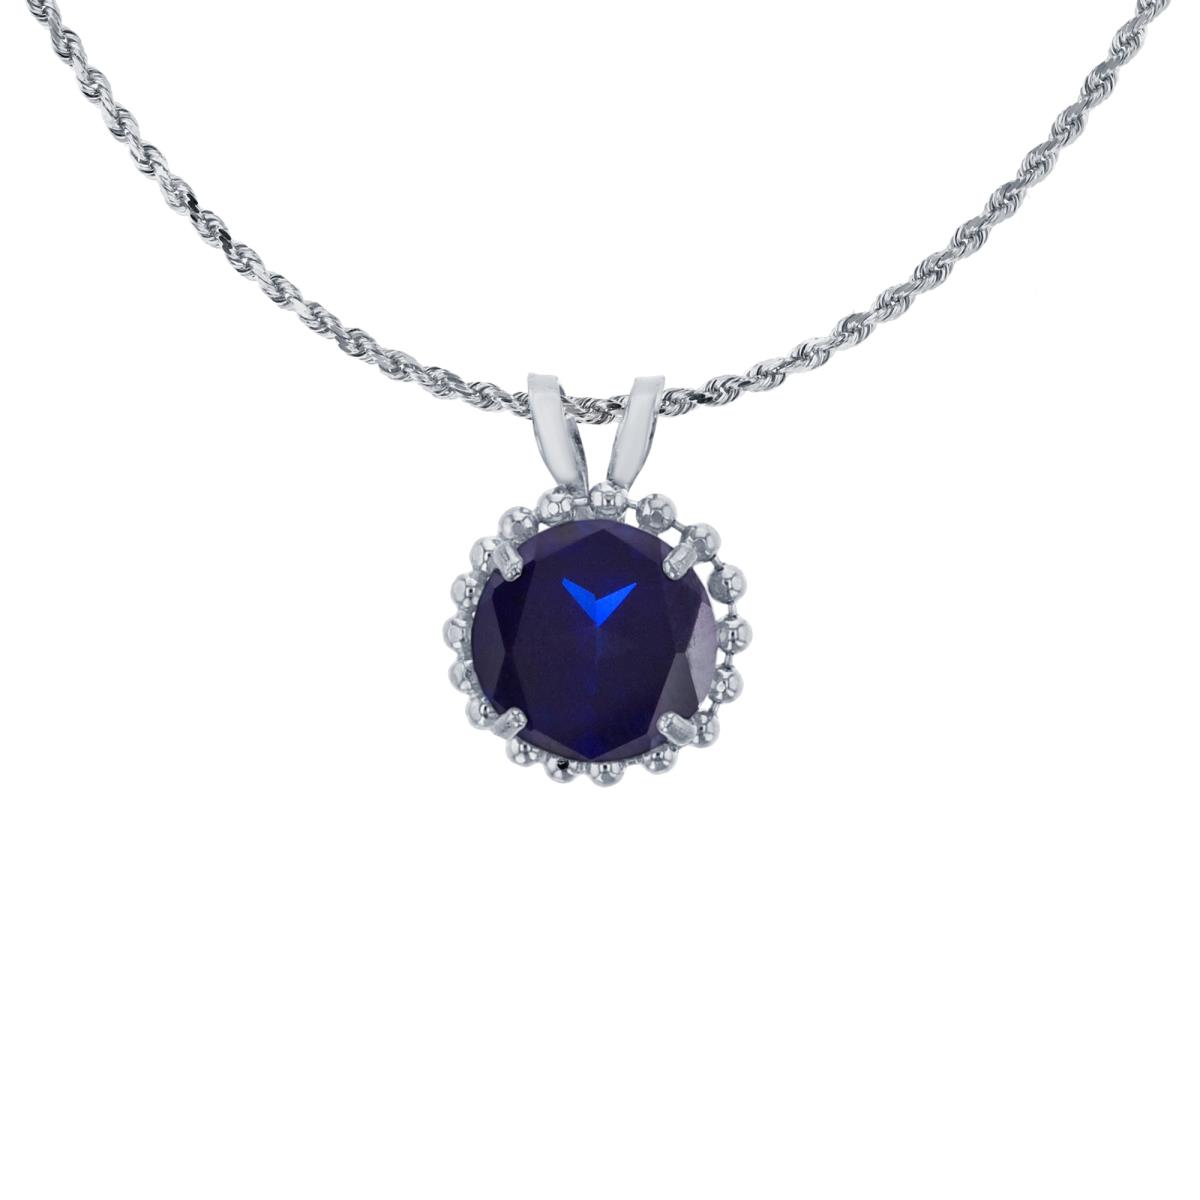 10K White Gold 6mm Rd Cut Created Blue Sapphire with Bead Frame Rabbit Ear 18" Necklace